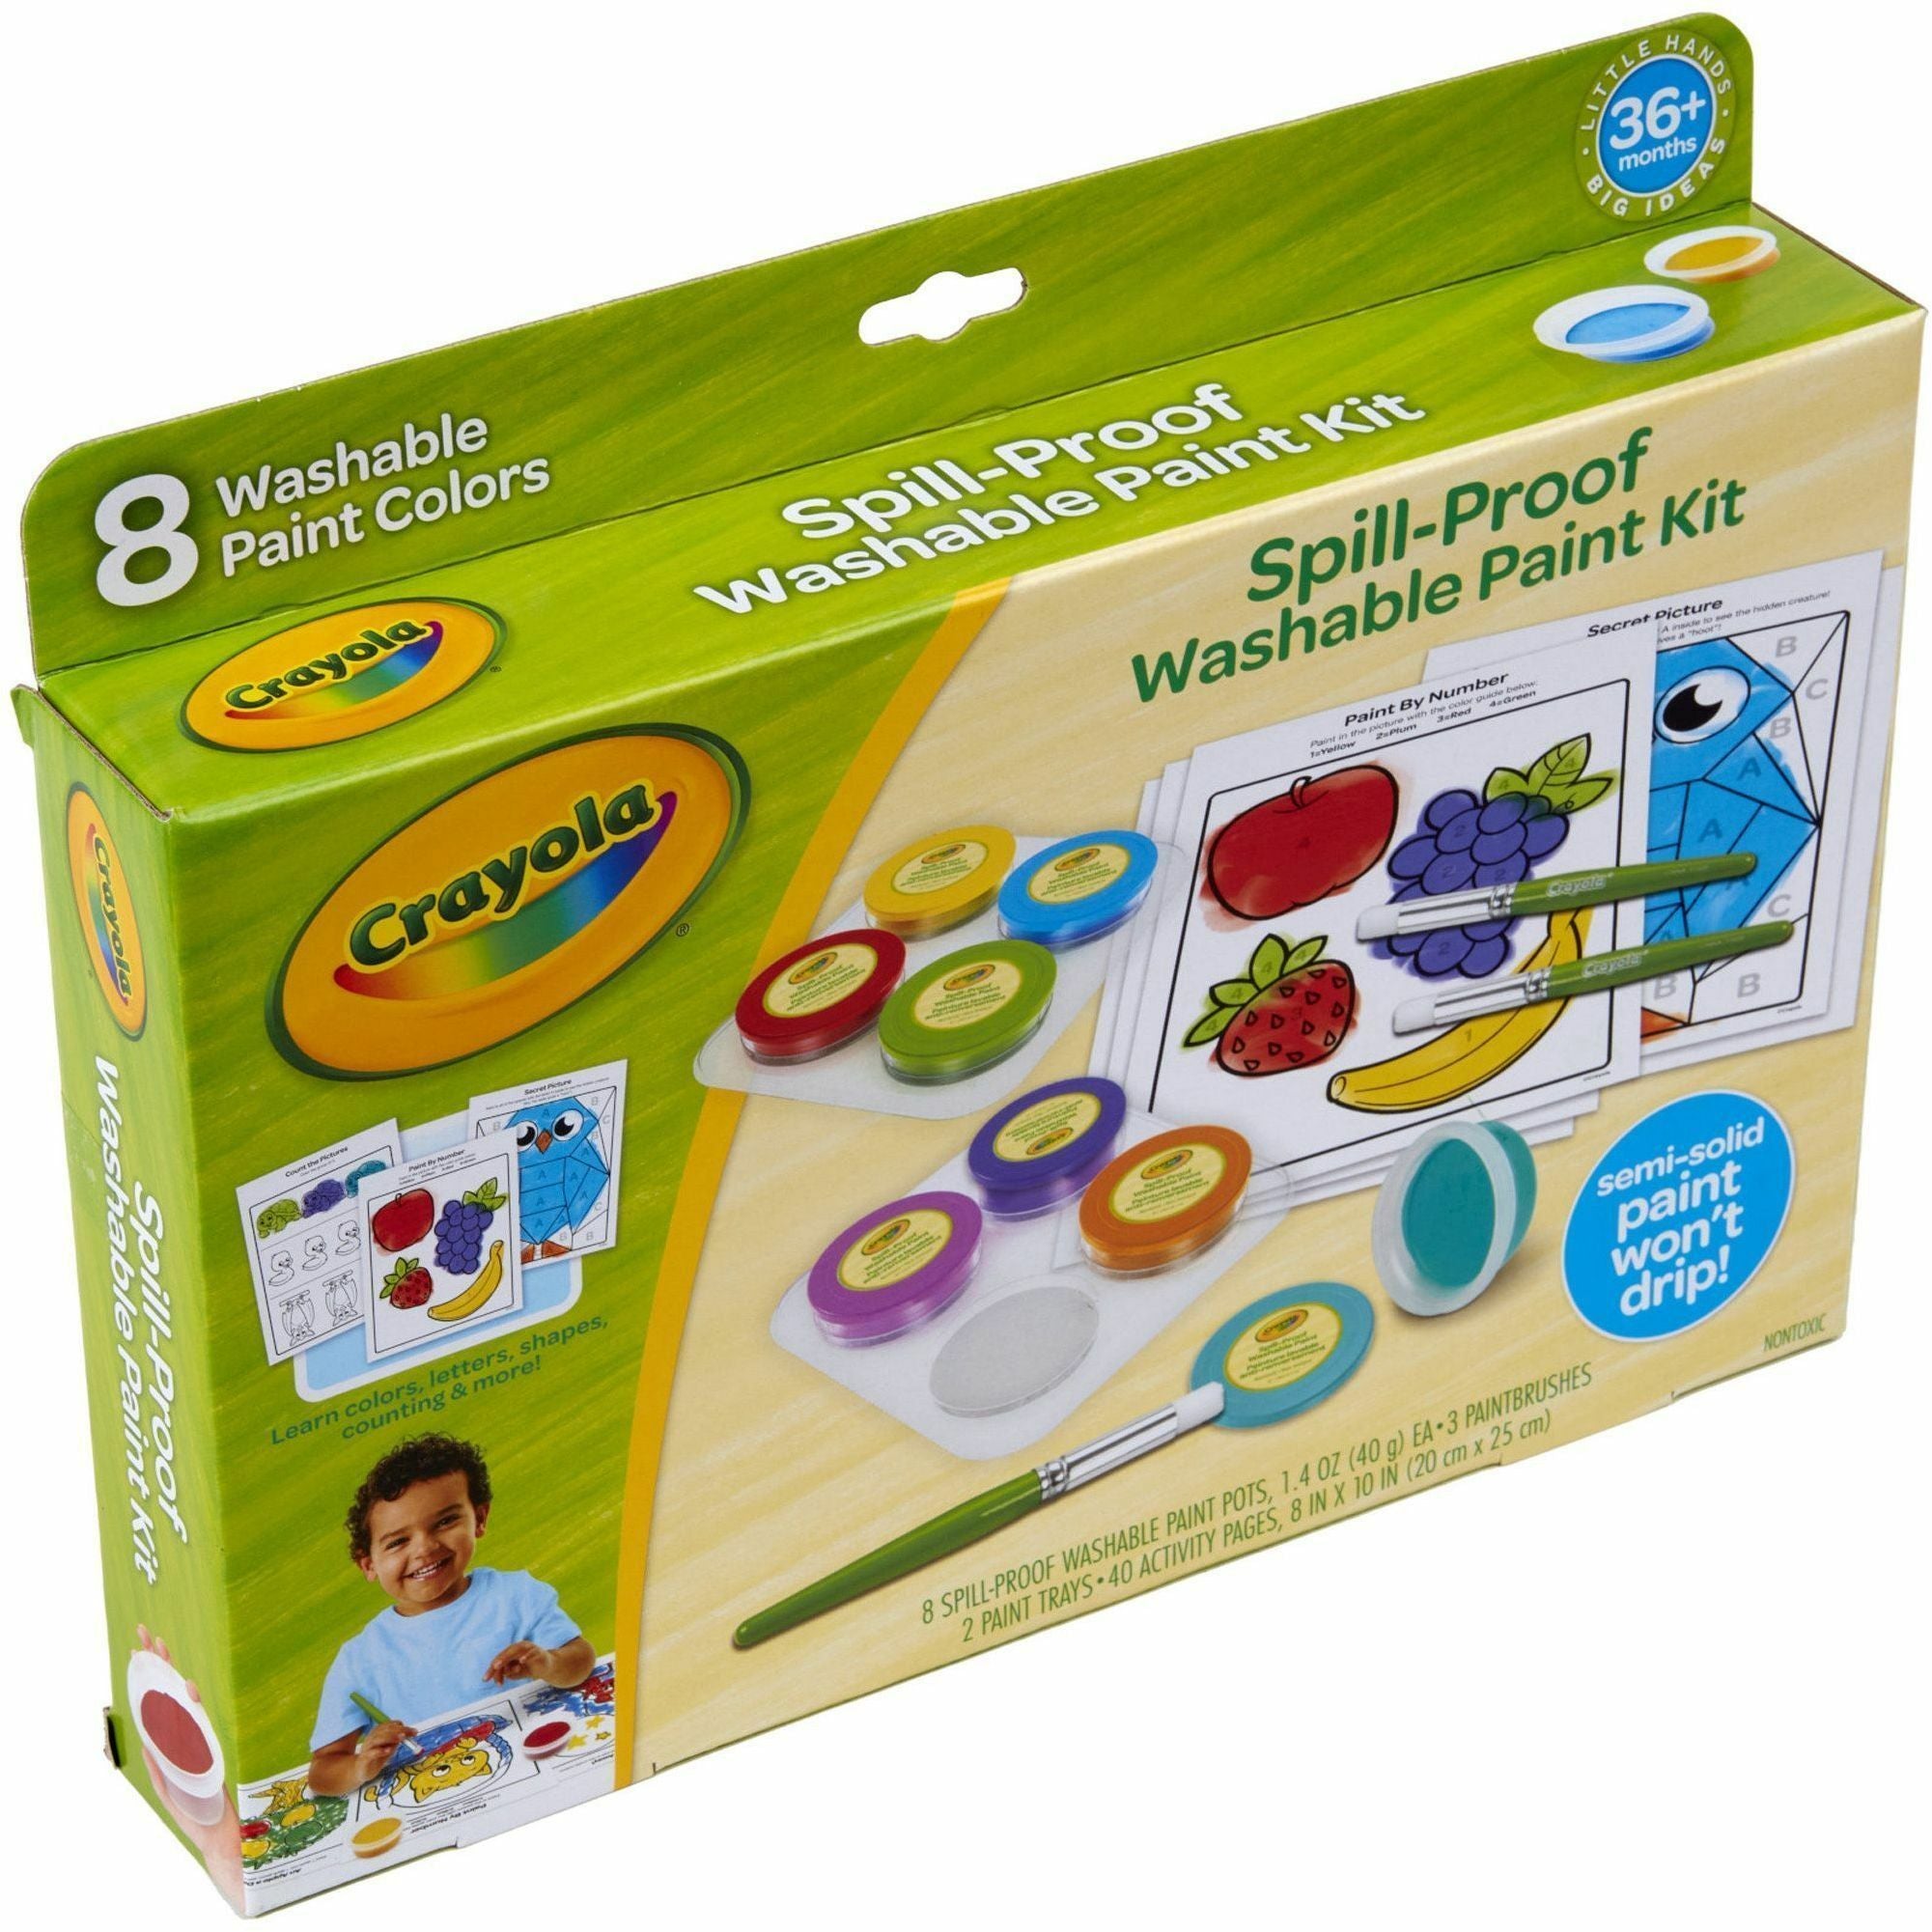 crayola-spill-proof-washable-paint-set-art-craft-fun-and-learning-recommended-for-3-year-1-kit_cyo811518 - 6